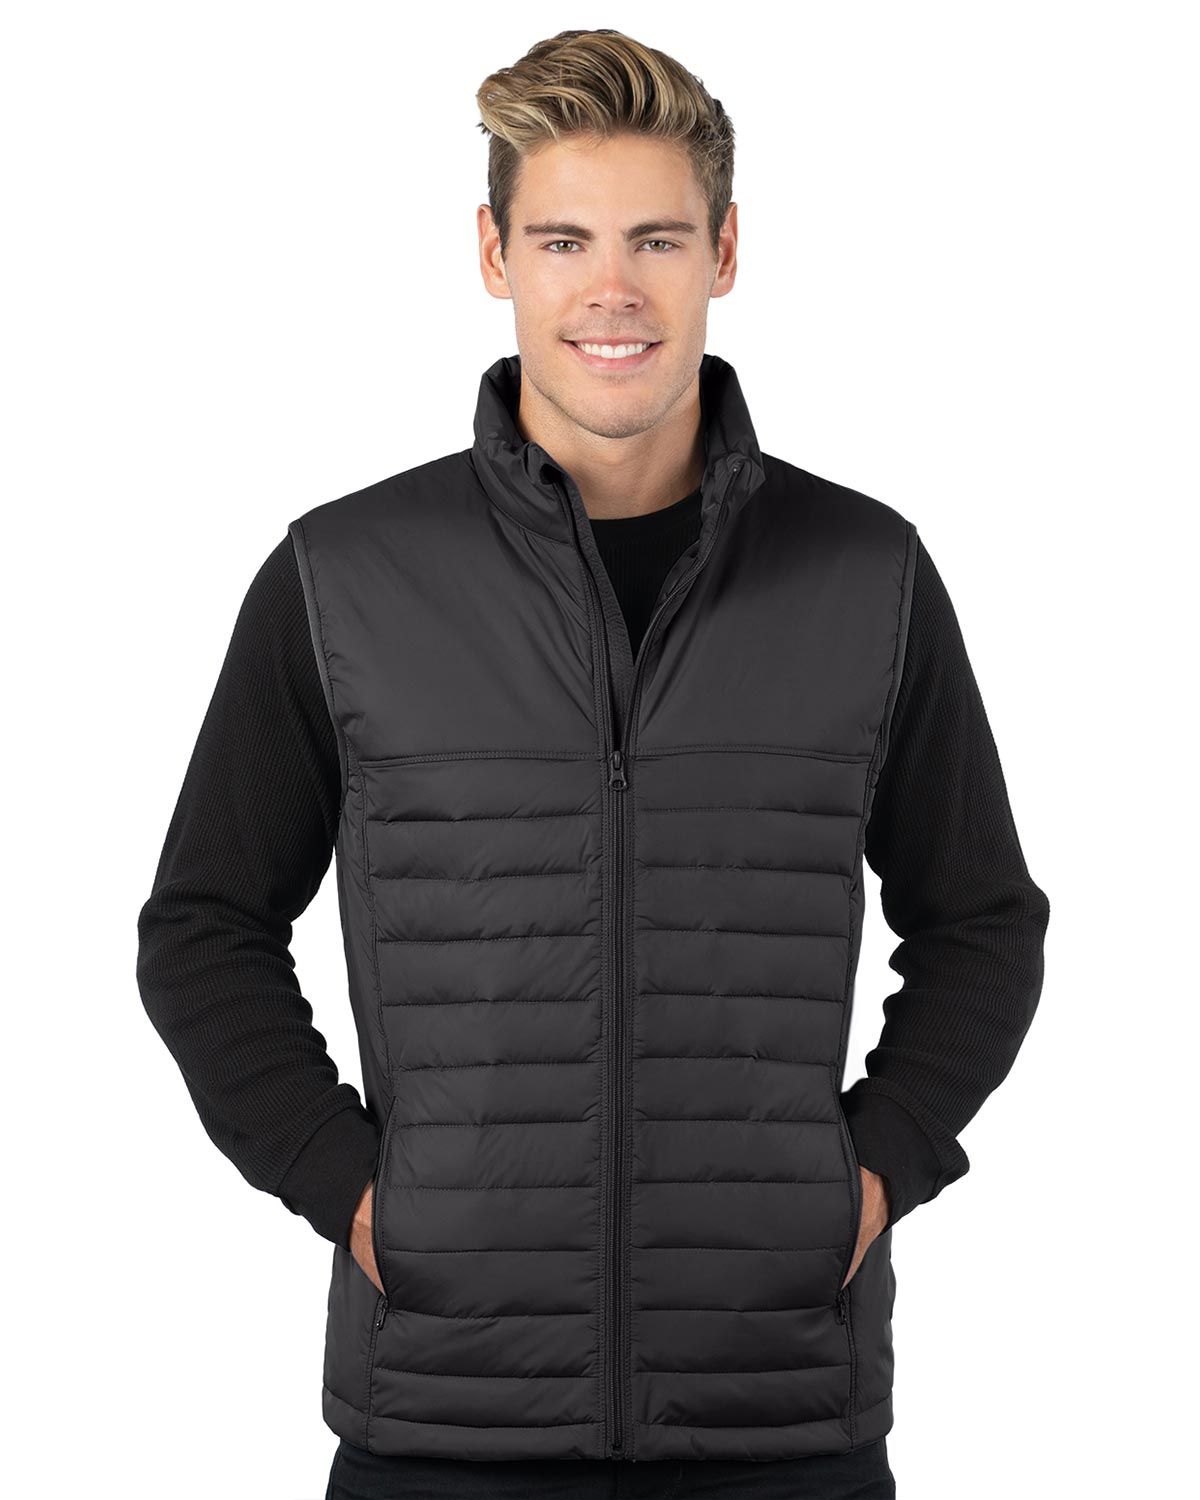 Tri-Mountain J8258 Men's Quilted Puffer Vest